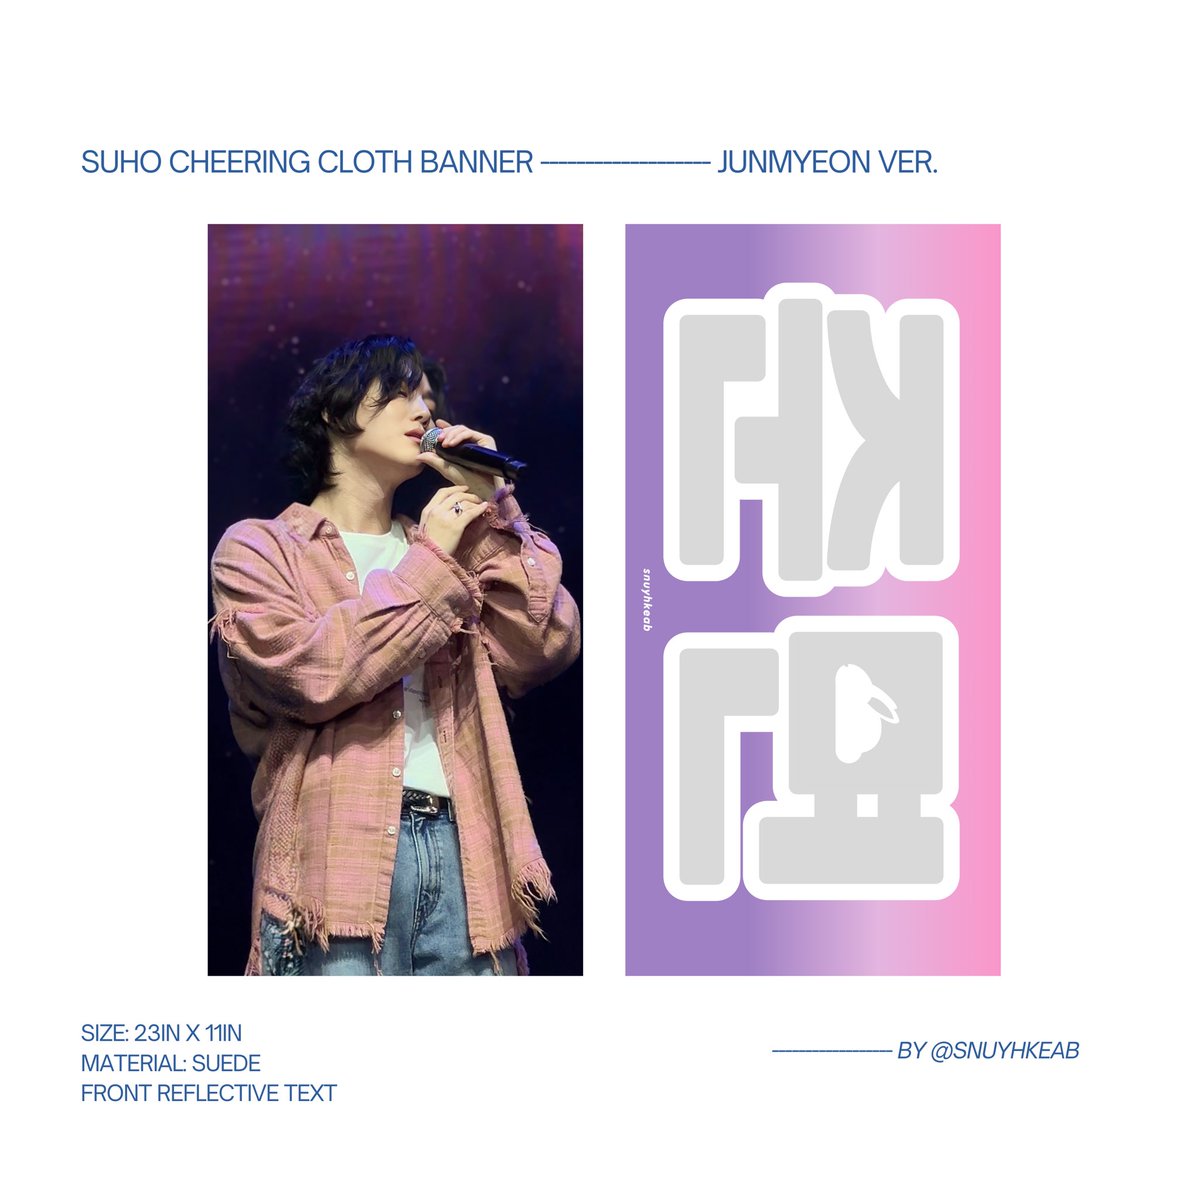 interest check .ᐟ w new design .ᐟ ㅡ wts lfb pls help rt 💗 suho cheering cloth banner ㅡ for su:home in manila ₊⊹ - size: 23in x 11in - material: suede, reflective front text - price is around 800-850 each - photos are my own from on music festival 🫶 dm me if